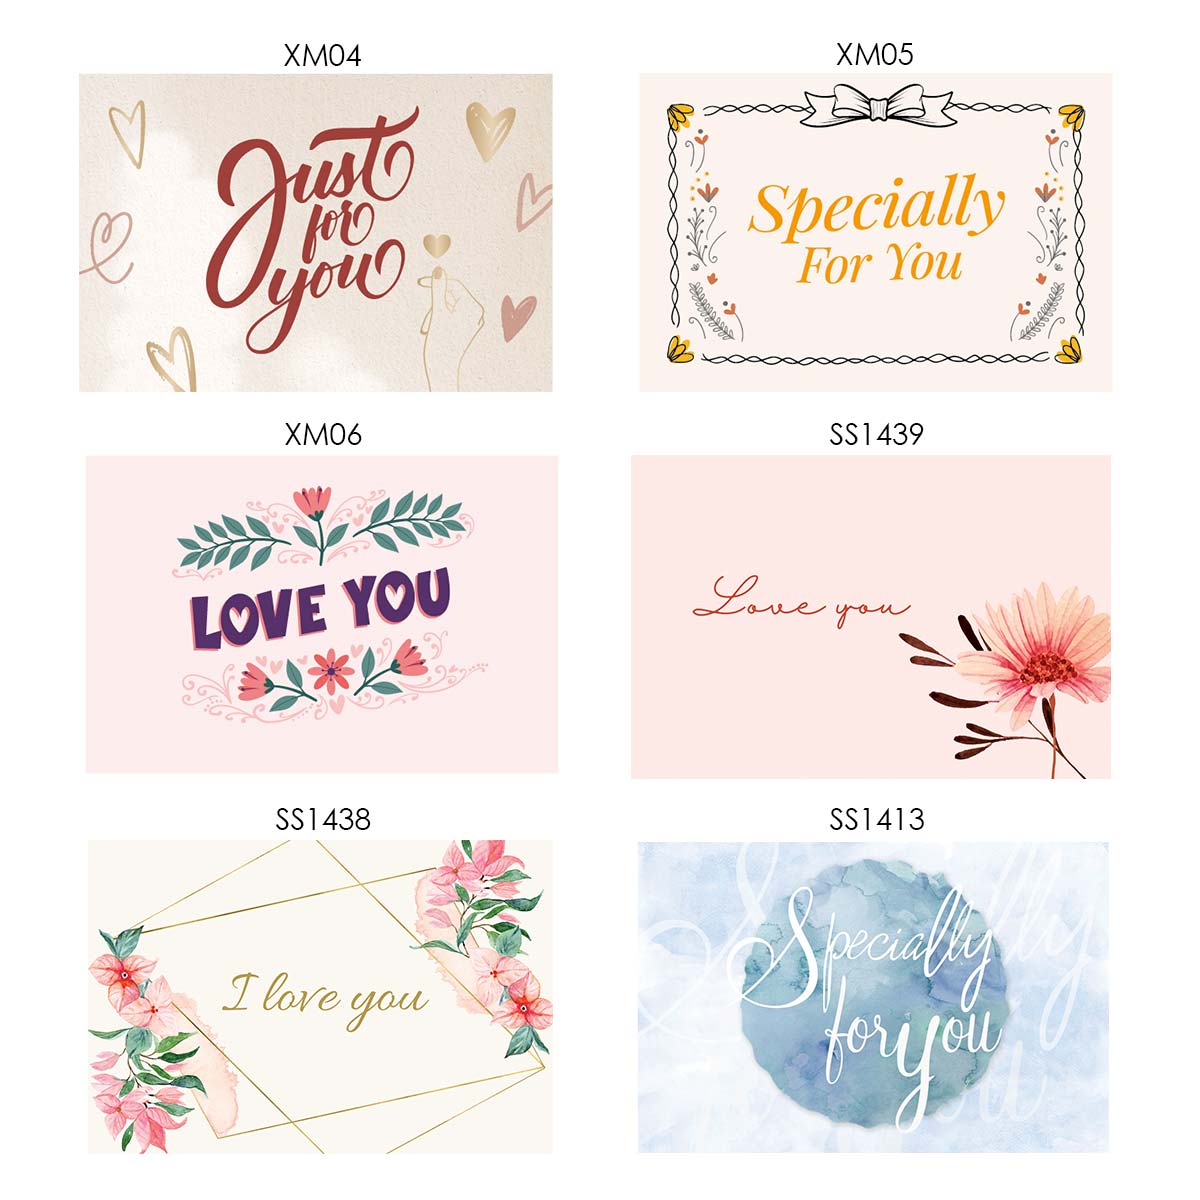 VDAY Greeting Cards Options